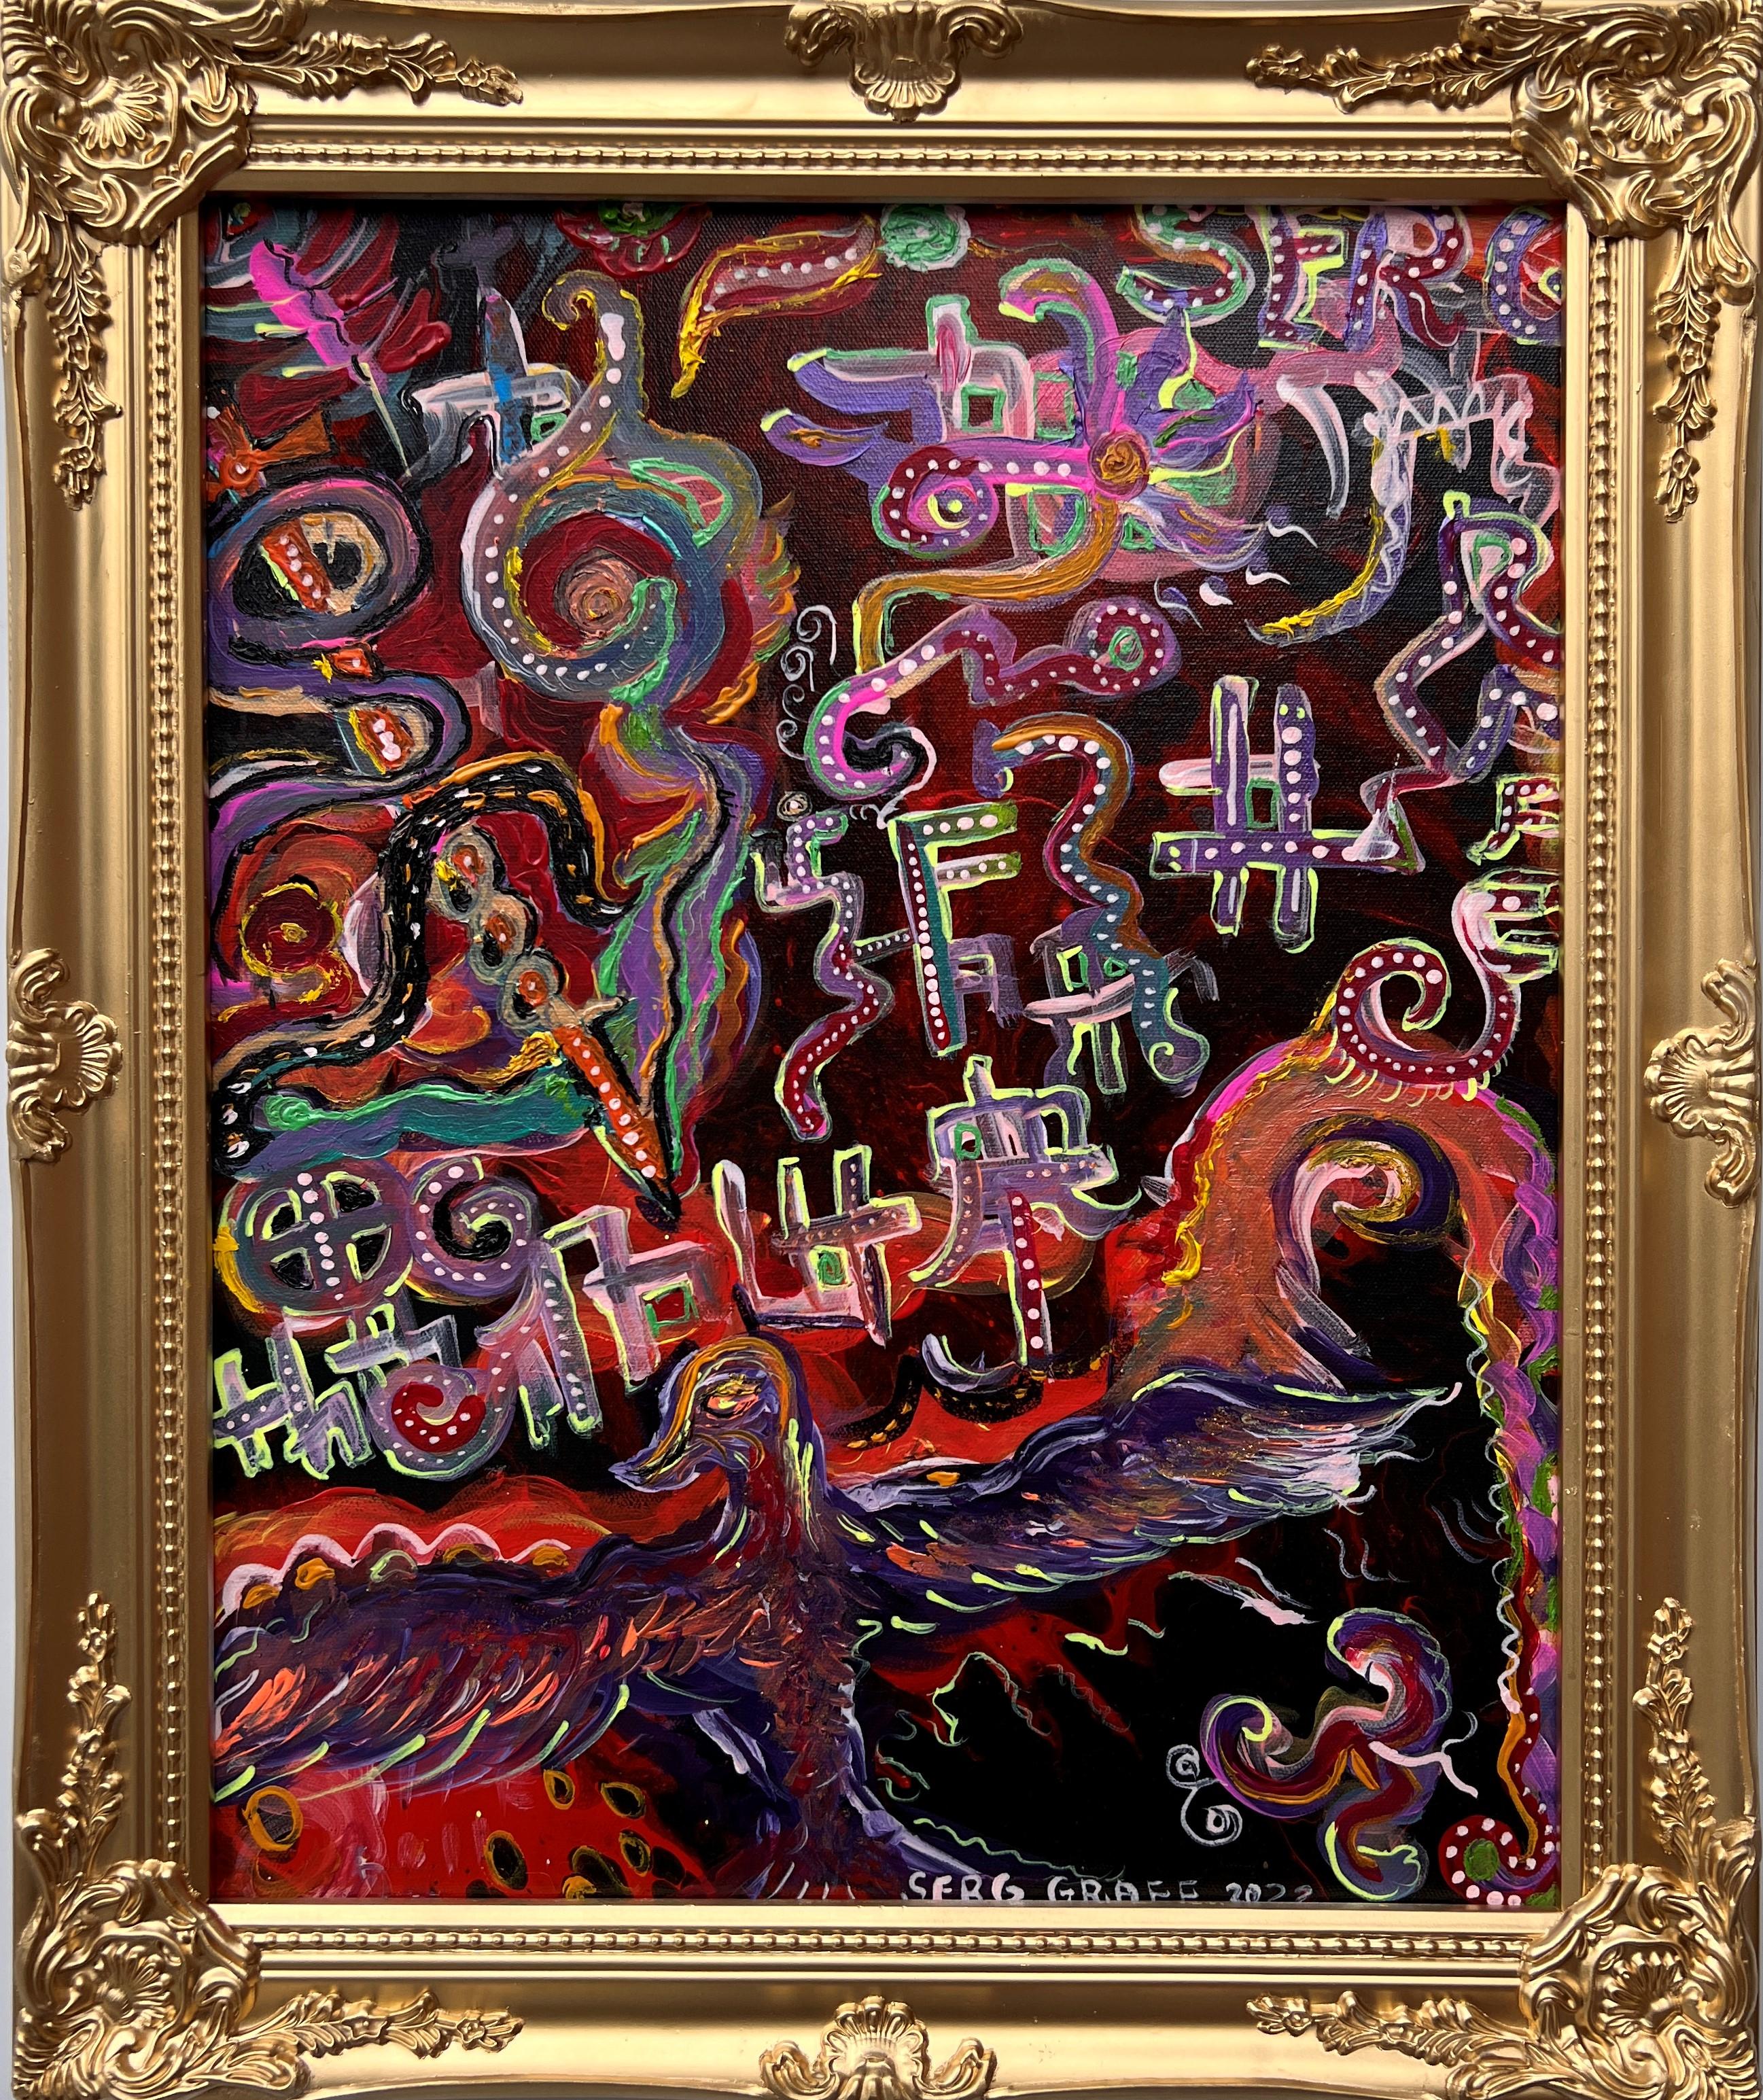 This is a unique original acrylic painting on canvas in a fantasy abstract style by Serg Graff Titled "Phoenix". 
 
It comes signed, dated, and with a COA (Certificate of Authenticity). 
 
Presented in an ornate gold frame. 
 
Excellent condition. 
